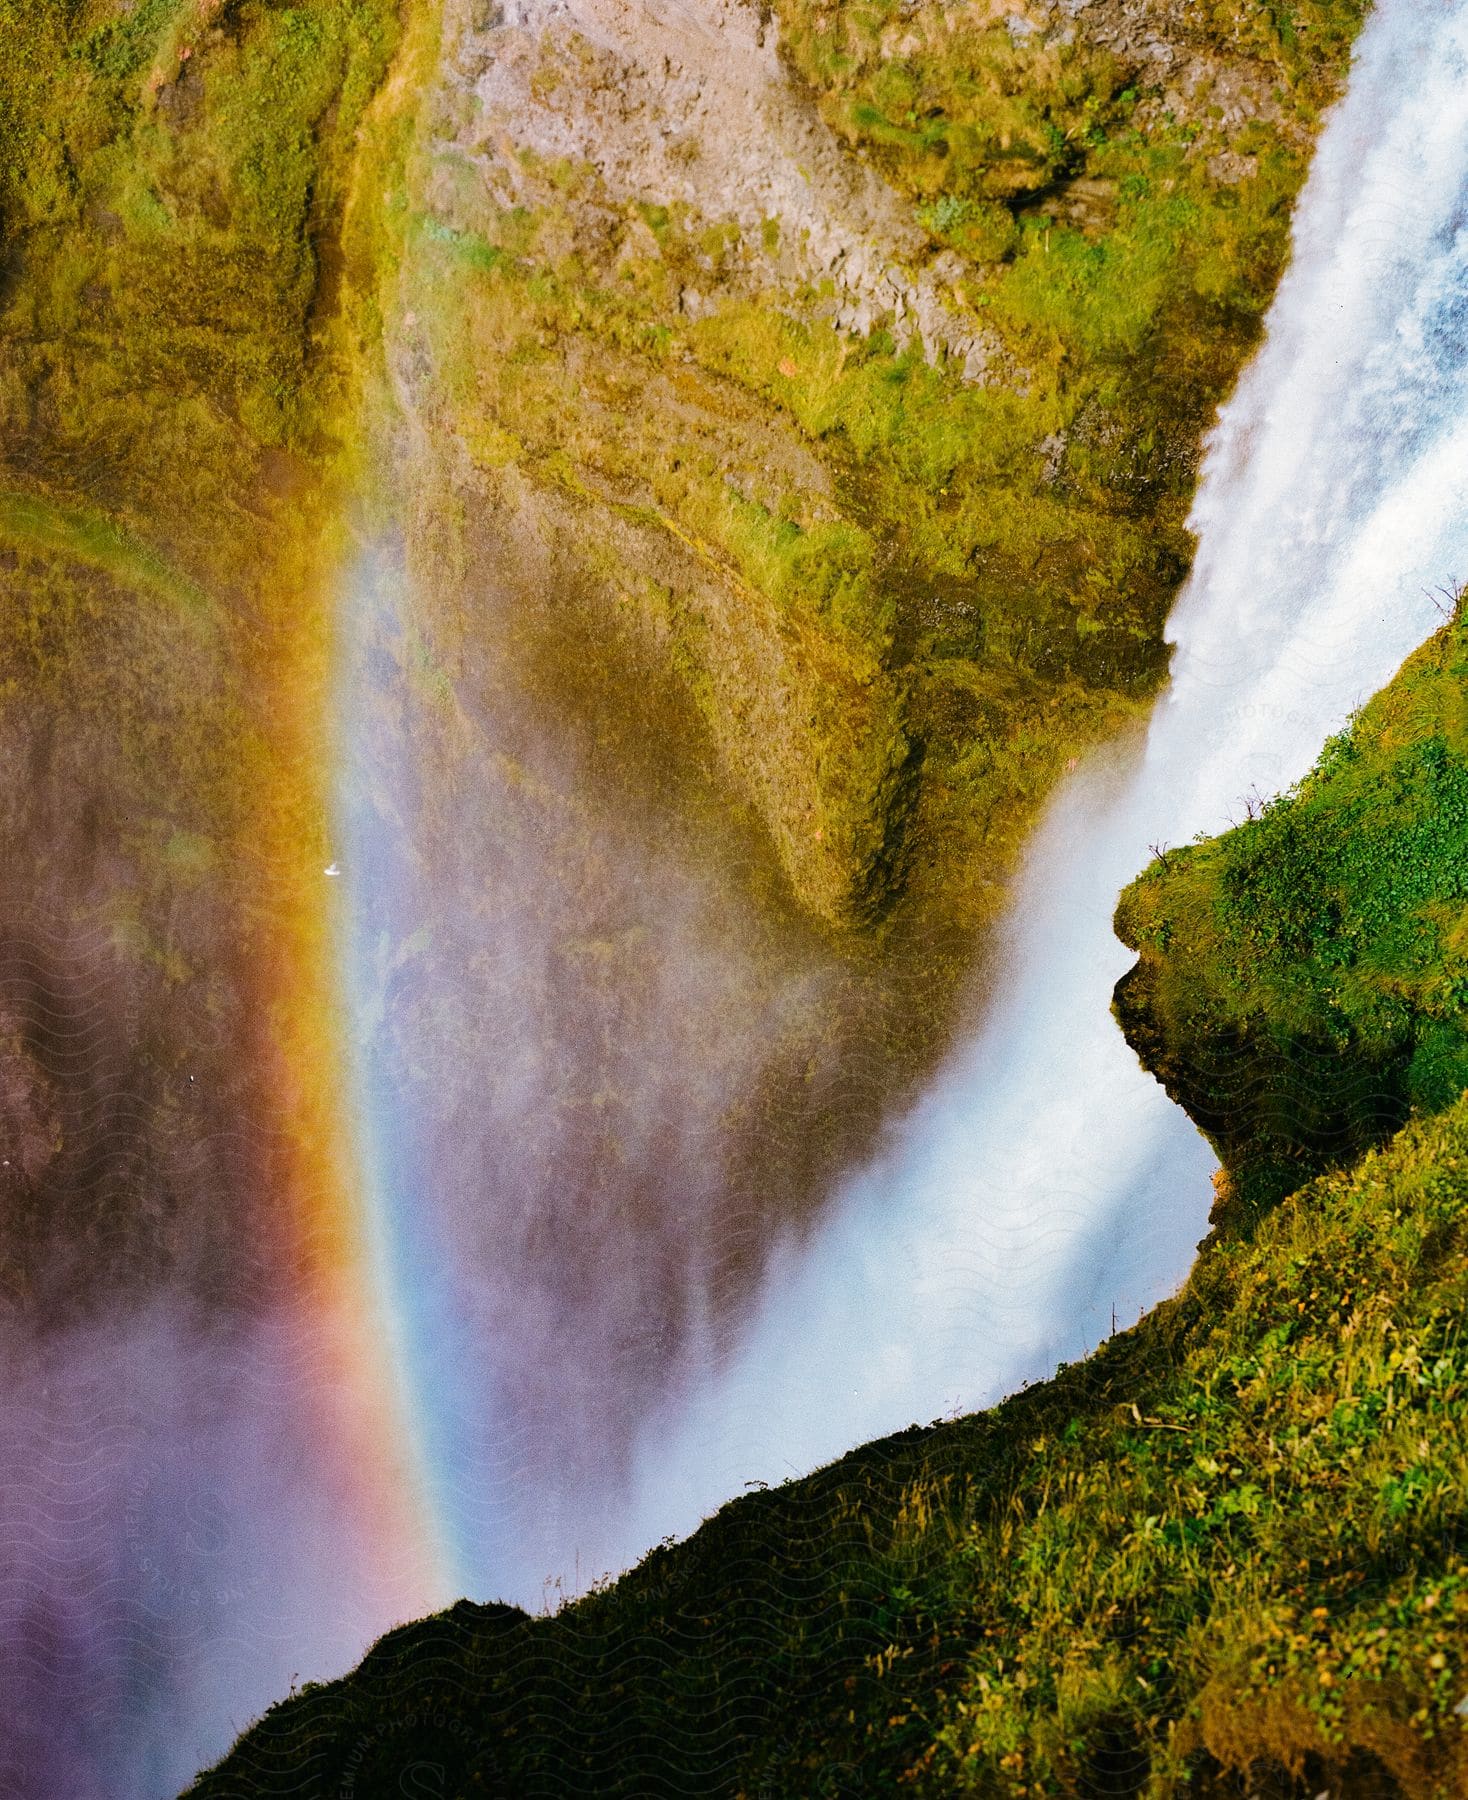 A rainbow forms next to a waterfall that pours over a steep cliffside.